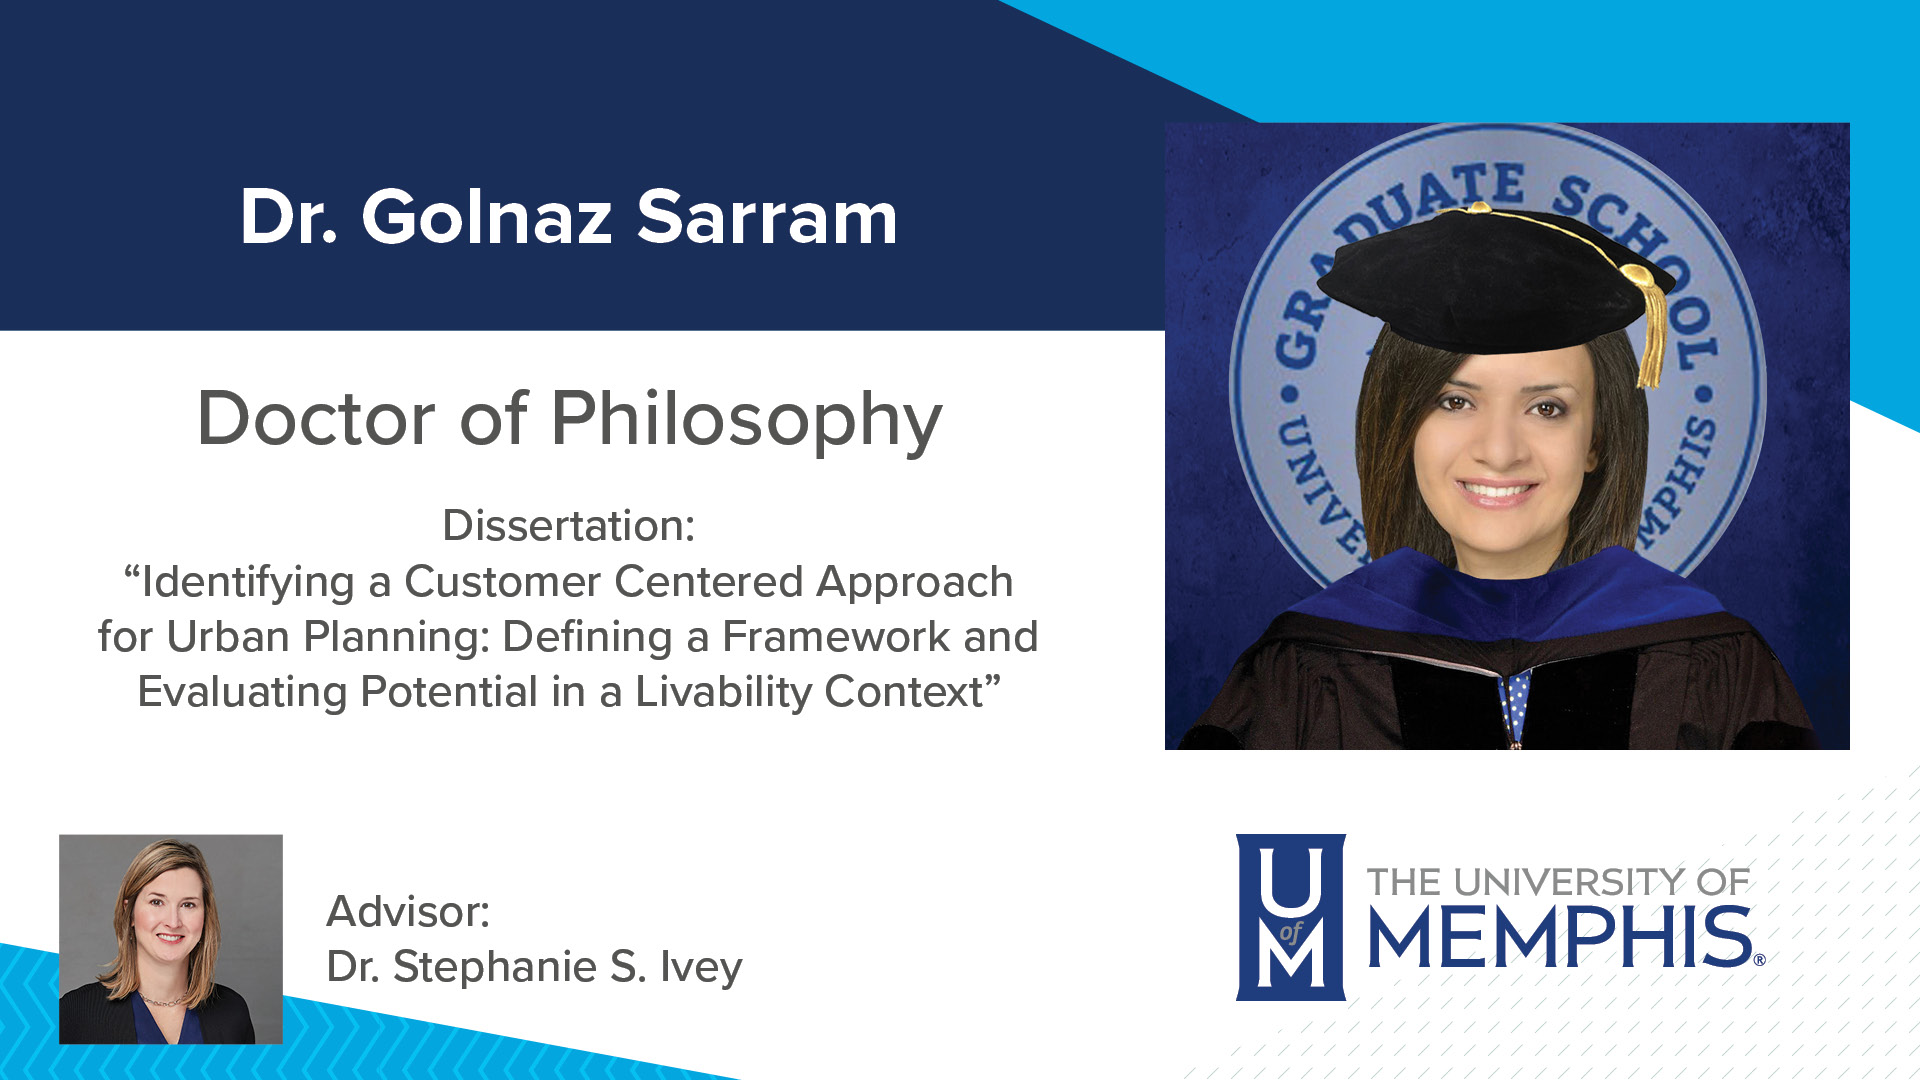 Dr. Golnaz Sarram Dissertation: “Identifying a Customer Centered Approach for Urban Planning: Defining a Framework and Evaluating Potential In a Livability Context” Major Professor: Dr. Stephanie S. Ivey